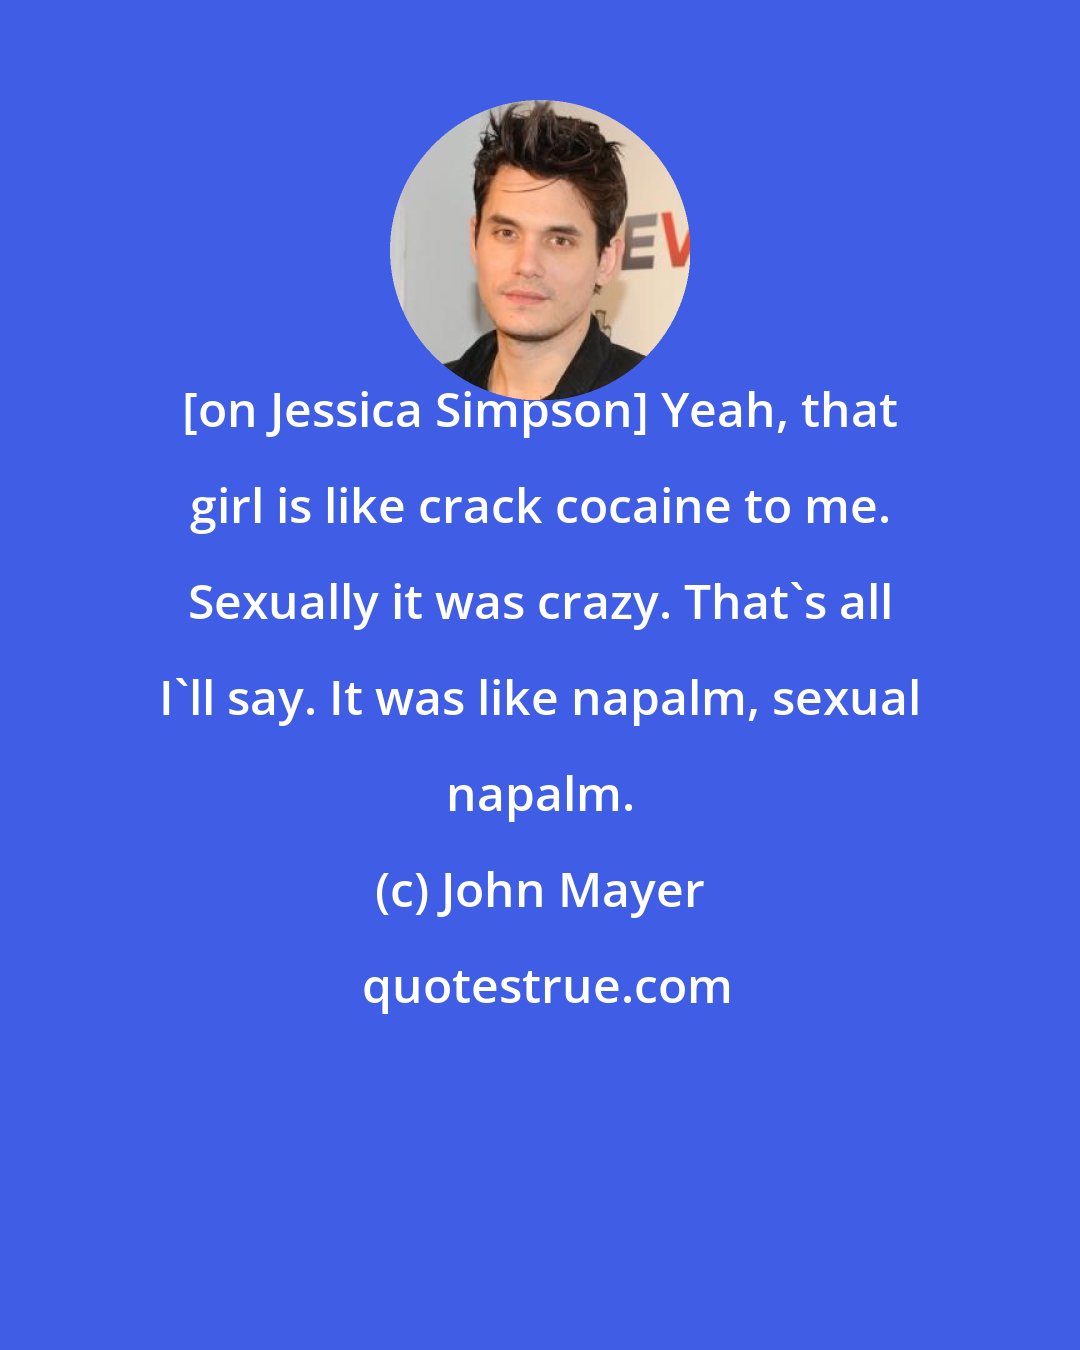 John Mayer: [on Jessica Simpson] Yeah, that girl is like crack cocaine to me. Sexually it was crazy. That's all I'll say. It was like napalm, sexual napalm.